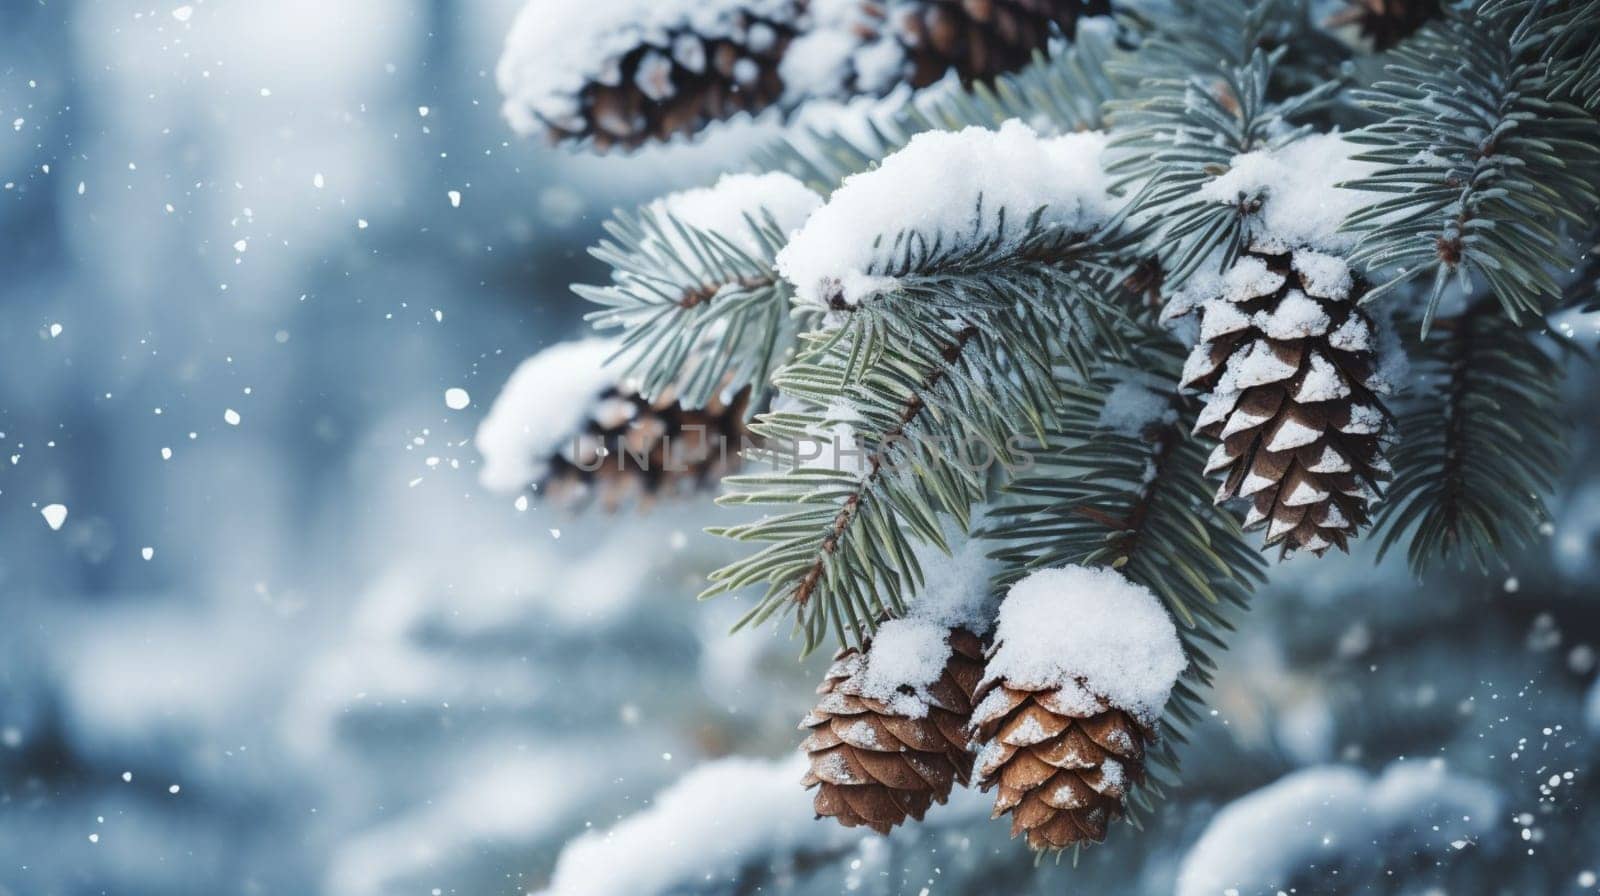 Snow-covered pine cones on a branch with falling snowflakes. High quality photo